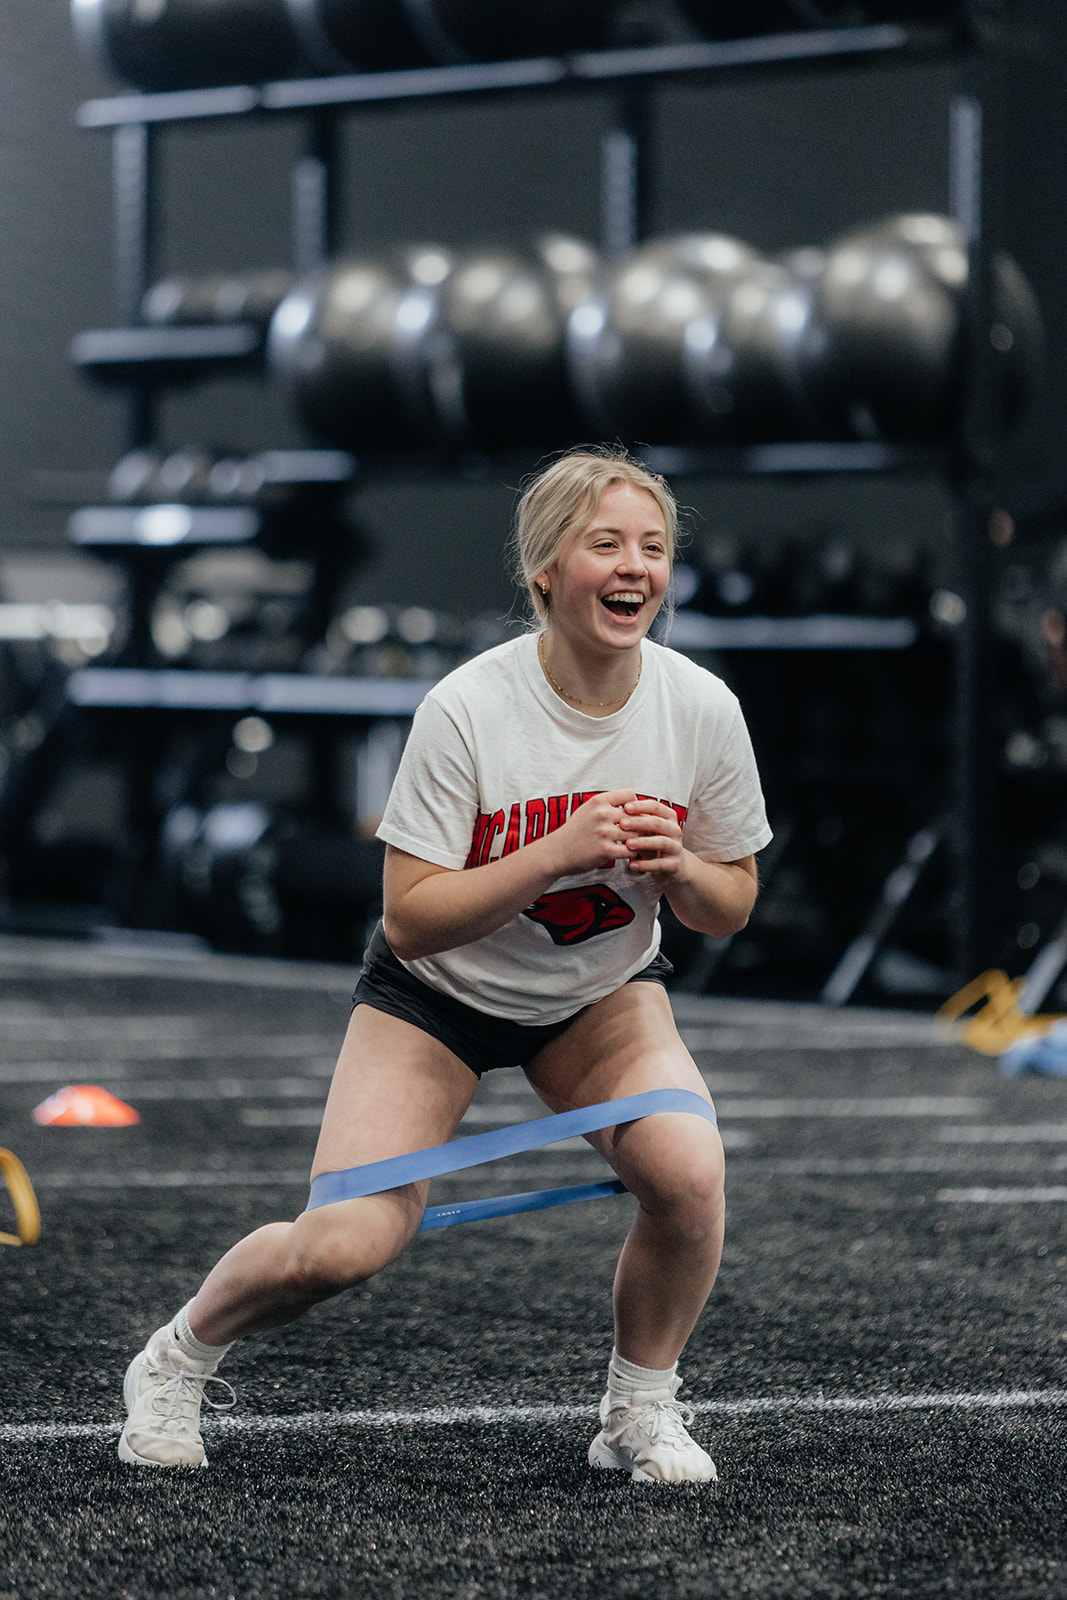 An athlete is smiling while doing a band drill on turf.